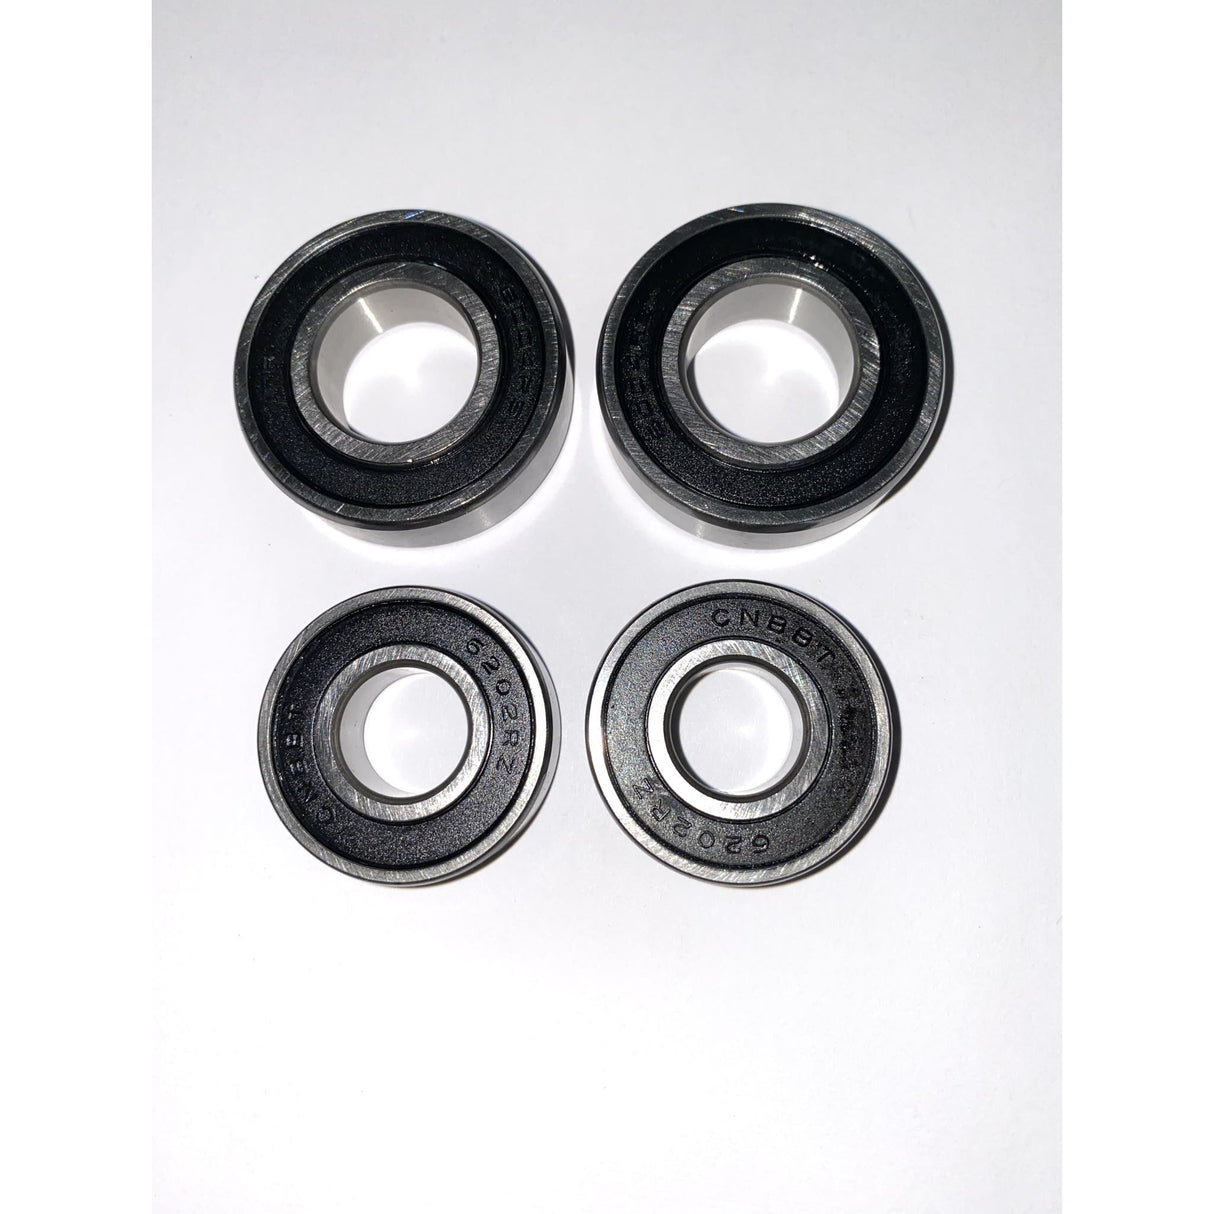 4007 | 4 Piece Wheel Bearing Set | 6004 RS and 6002 RS | V5